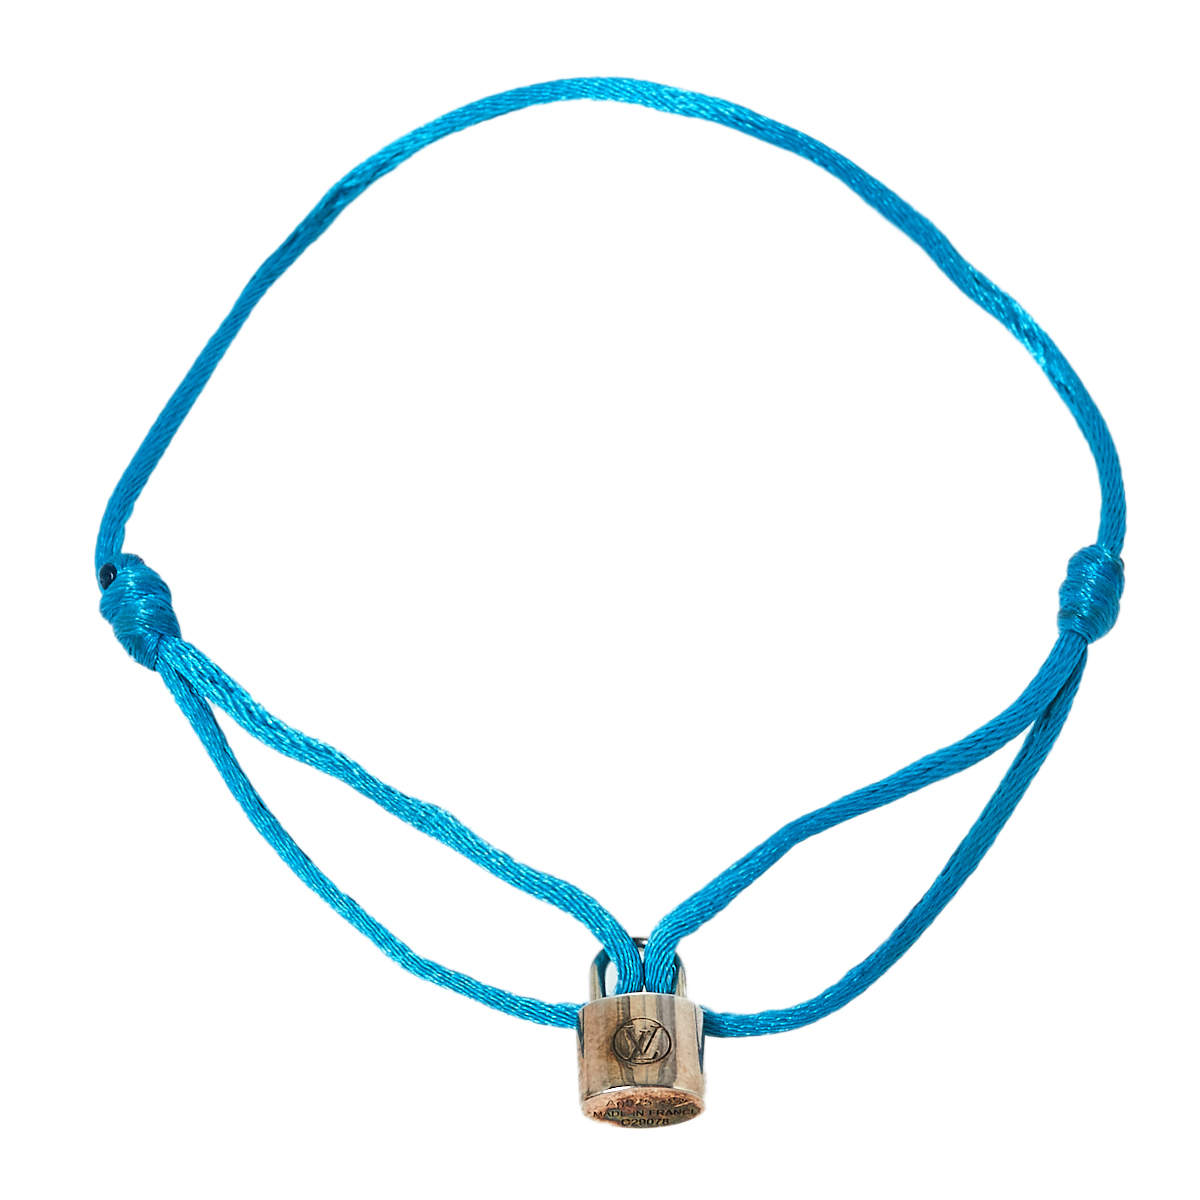 Louis Vuitton releases new Virgil Ablohinspired bracelets with proceeds  going to UNICEF  TSNca